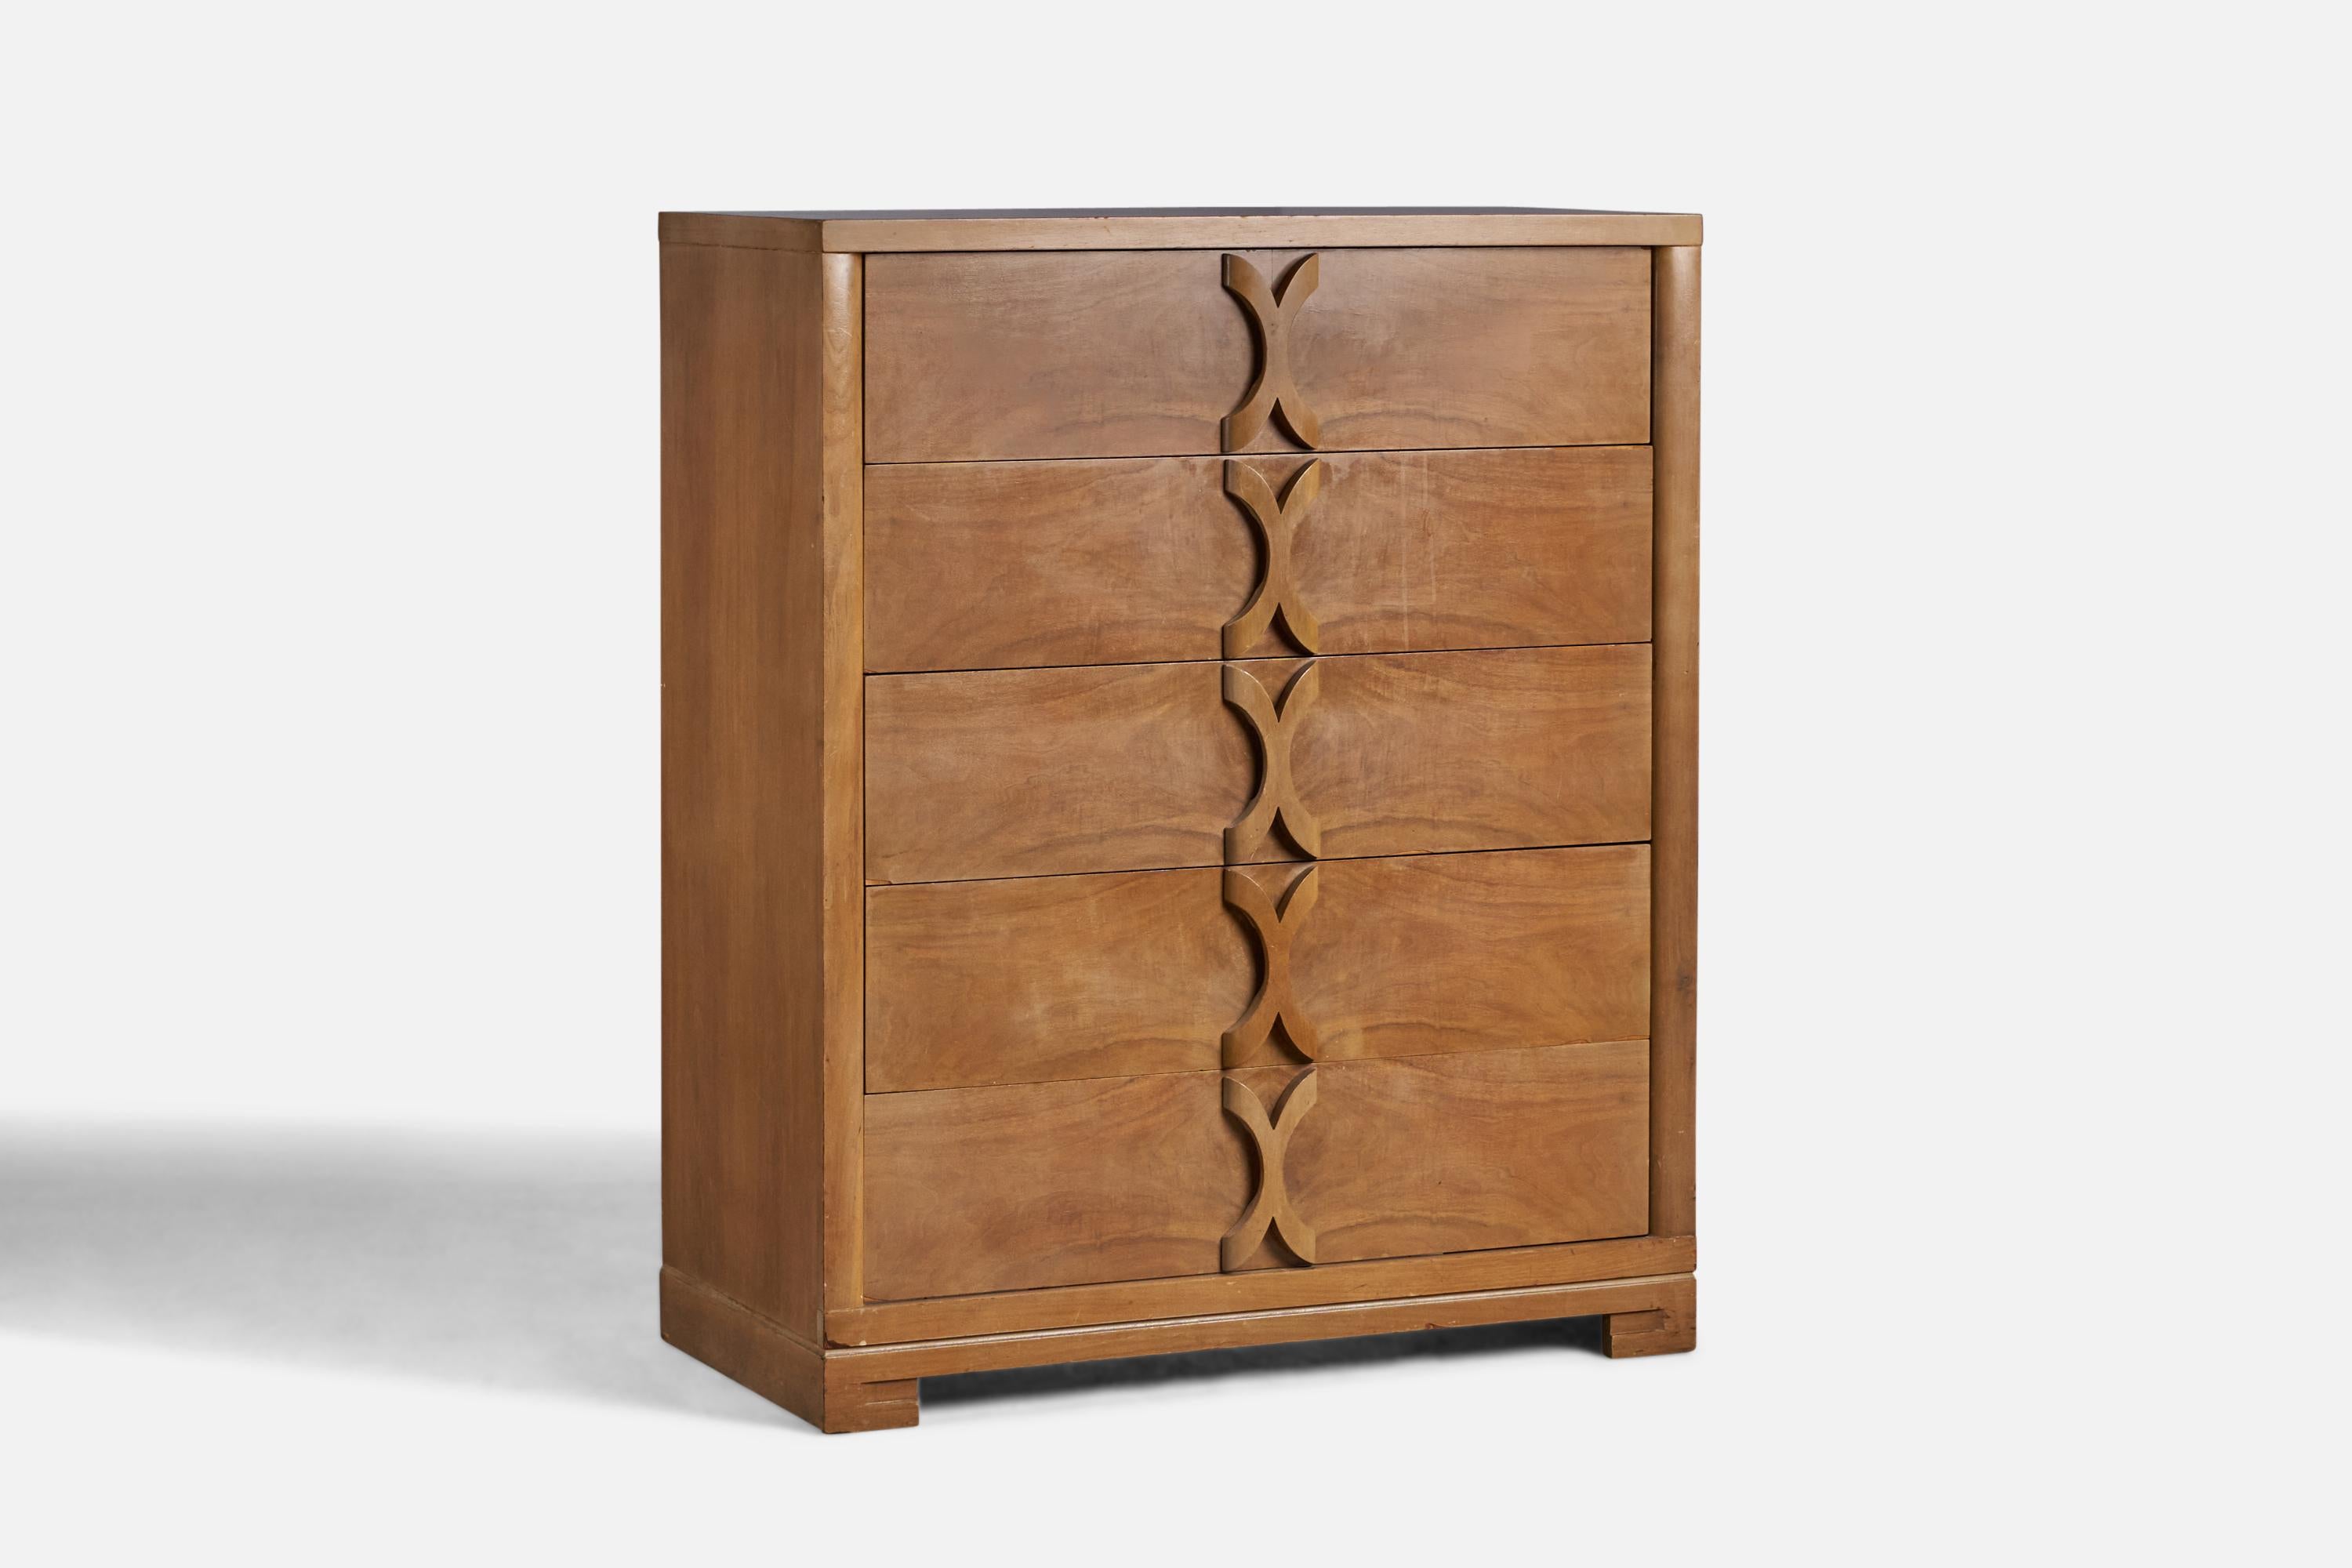 A walnut chest of drawers designed and produced in the US, 1940s.